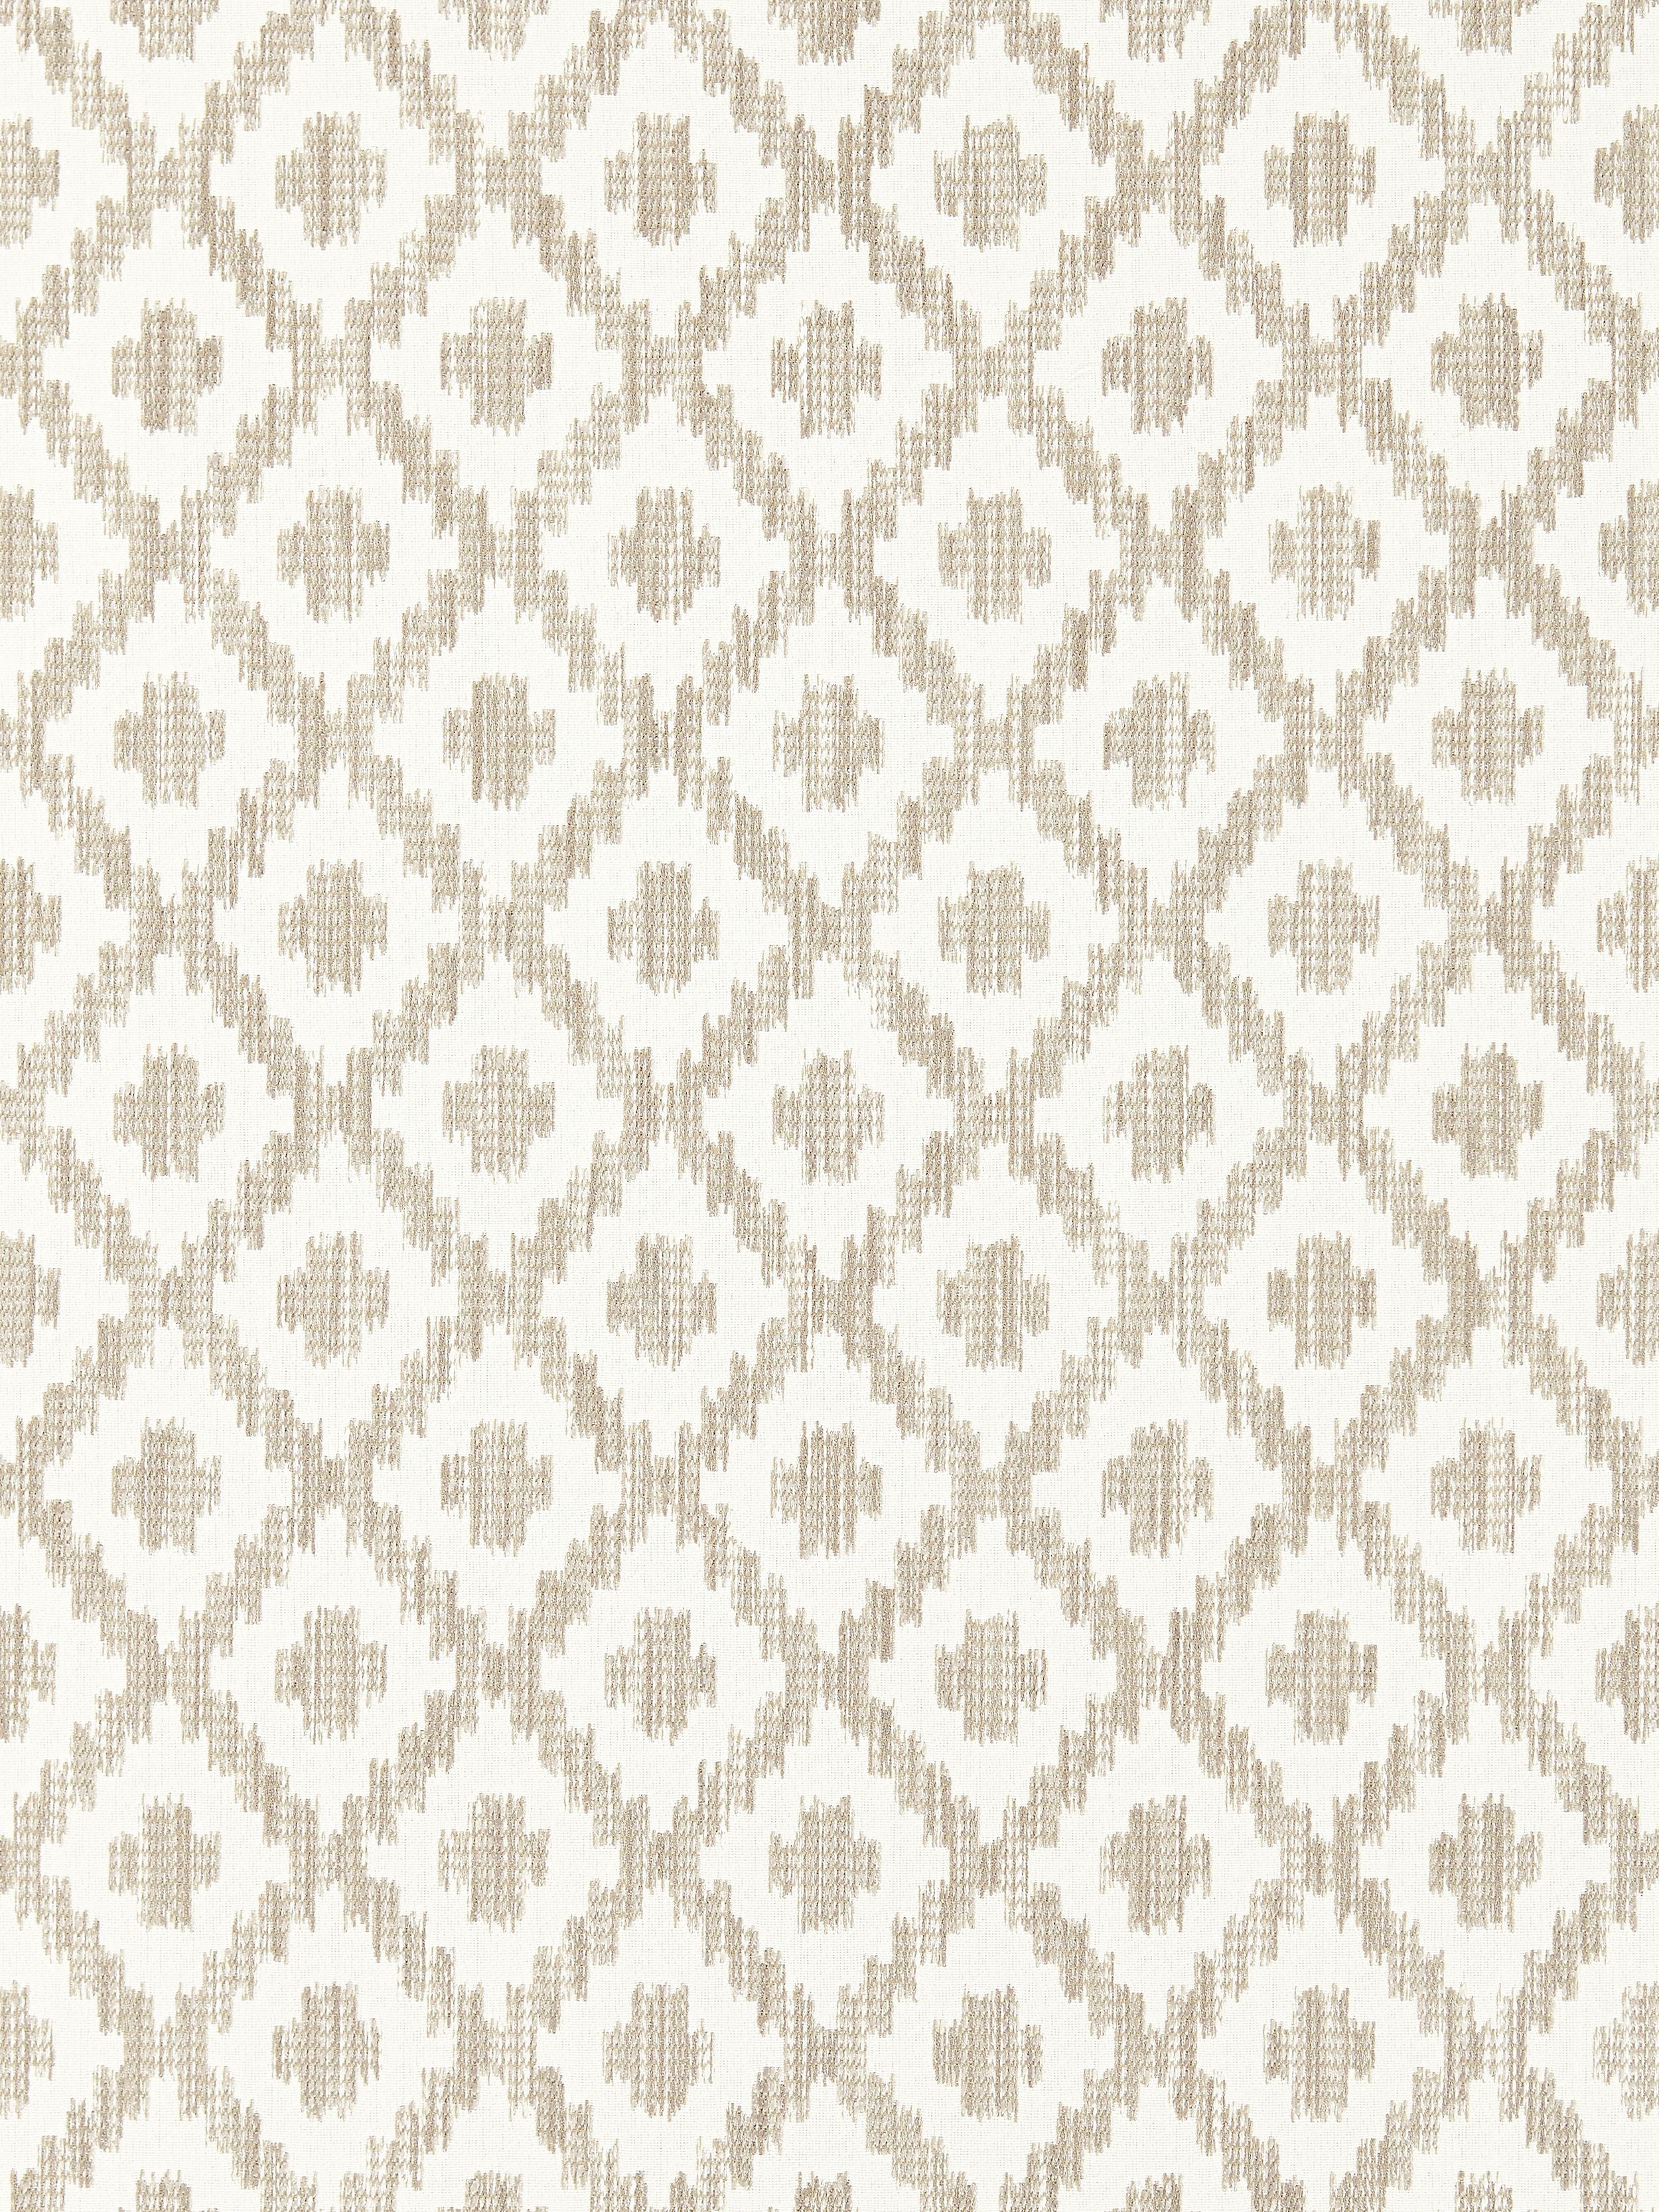 Malay Ikat Weave fabric in flax color - pattern number SC 000127098 - by Scalamandre in the Scalamandre Fabrics Book 1 collection